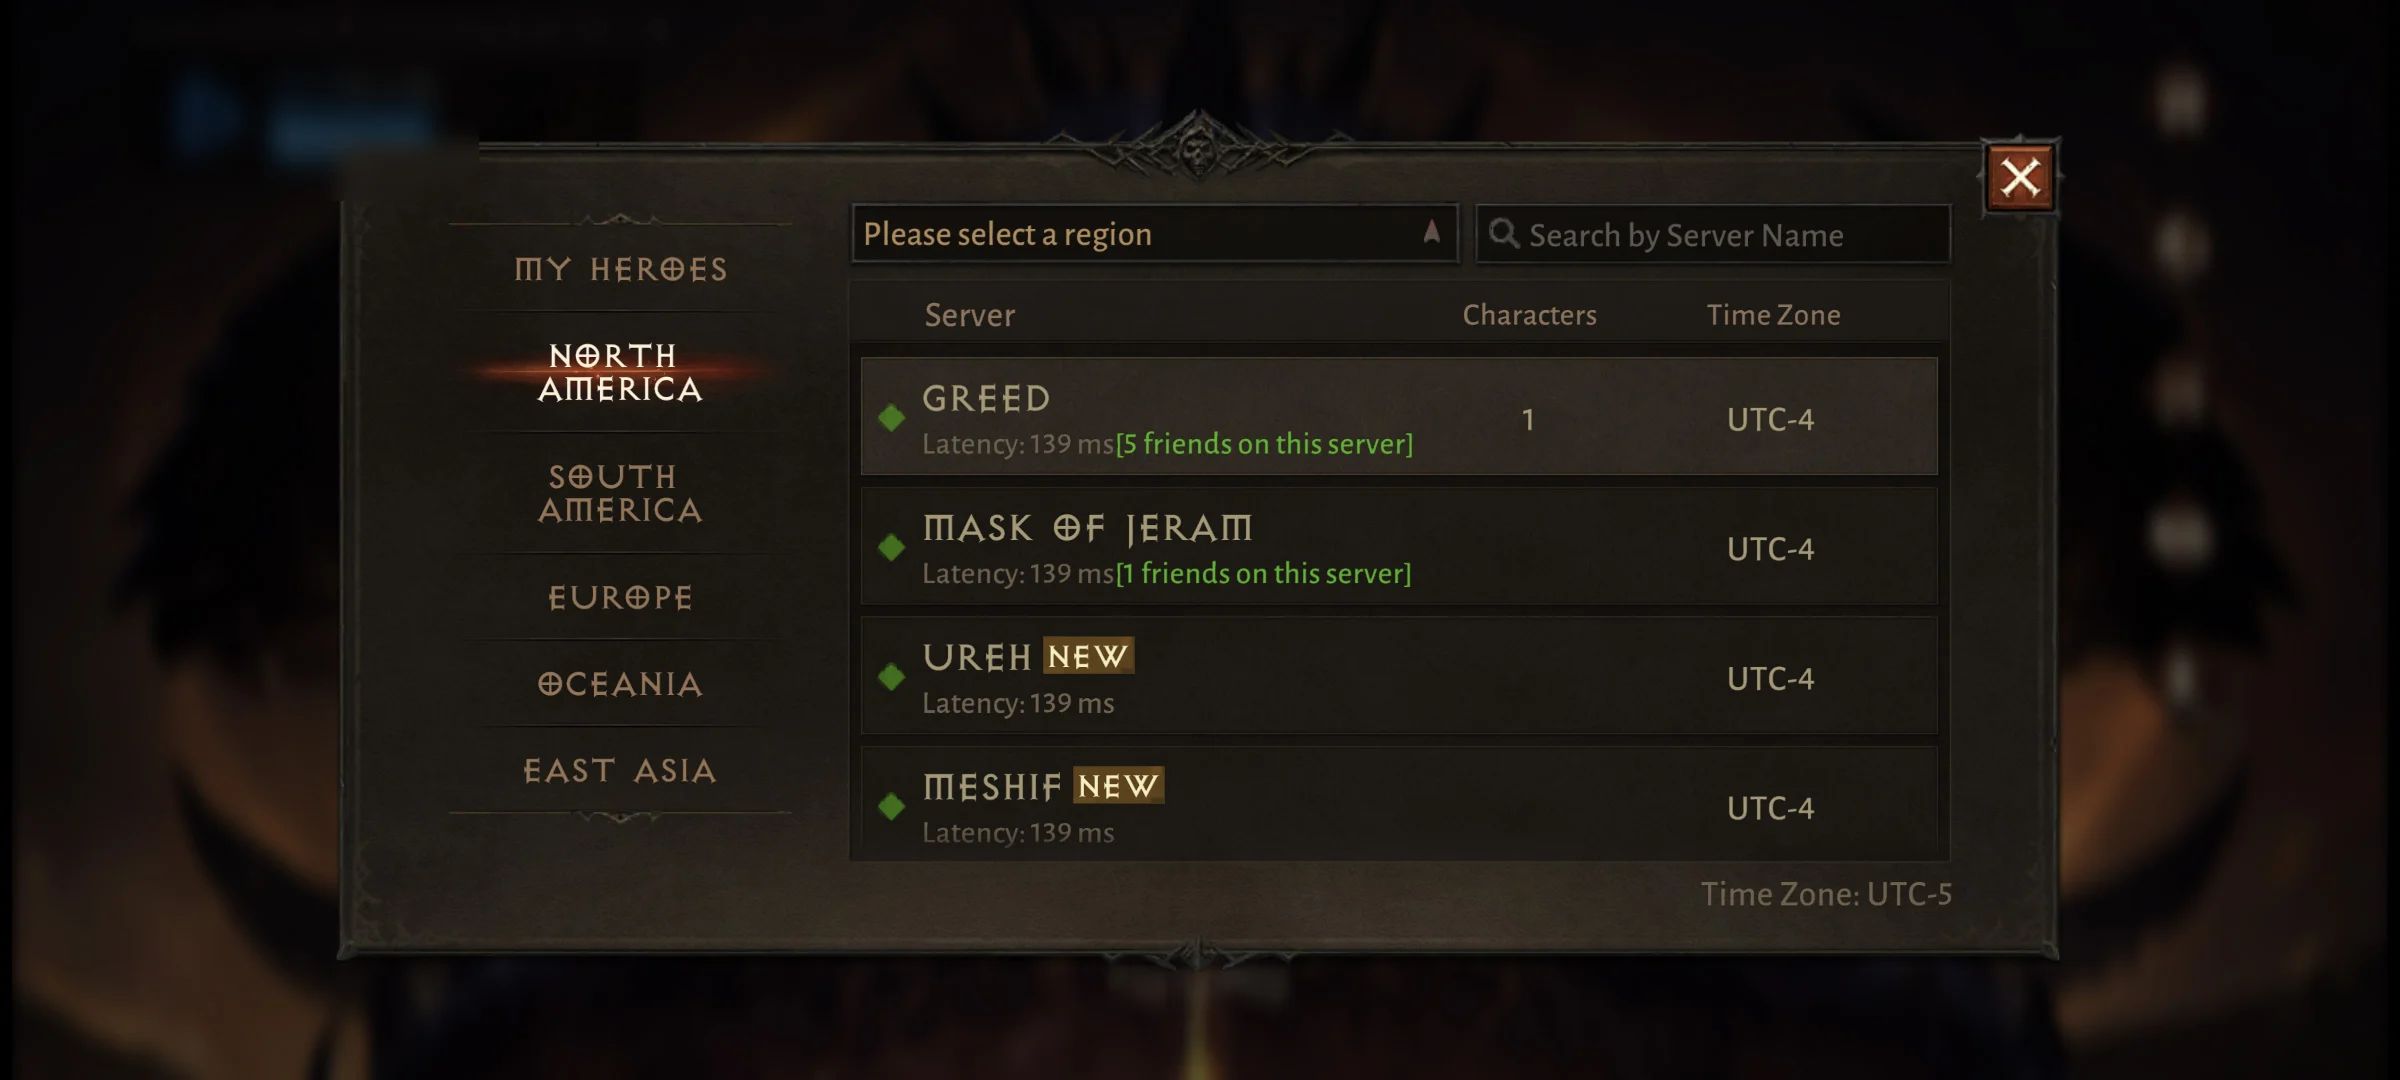 How to Select Your Server in Diablo Immortal